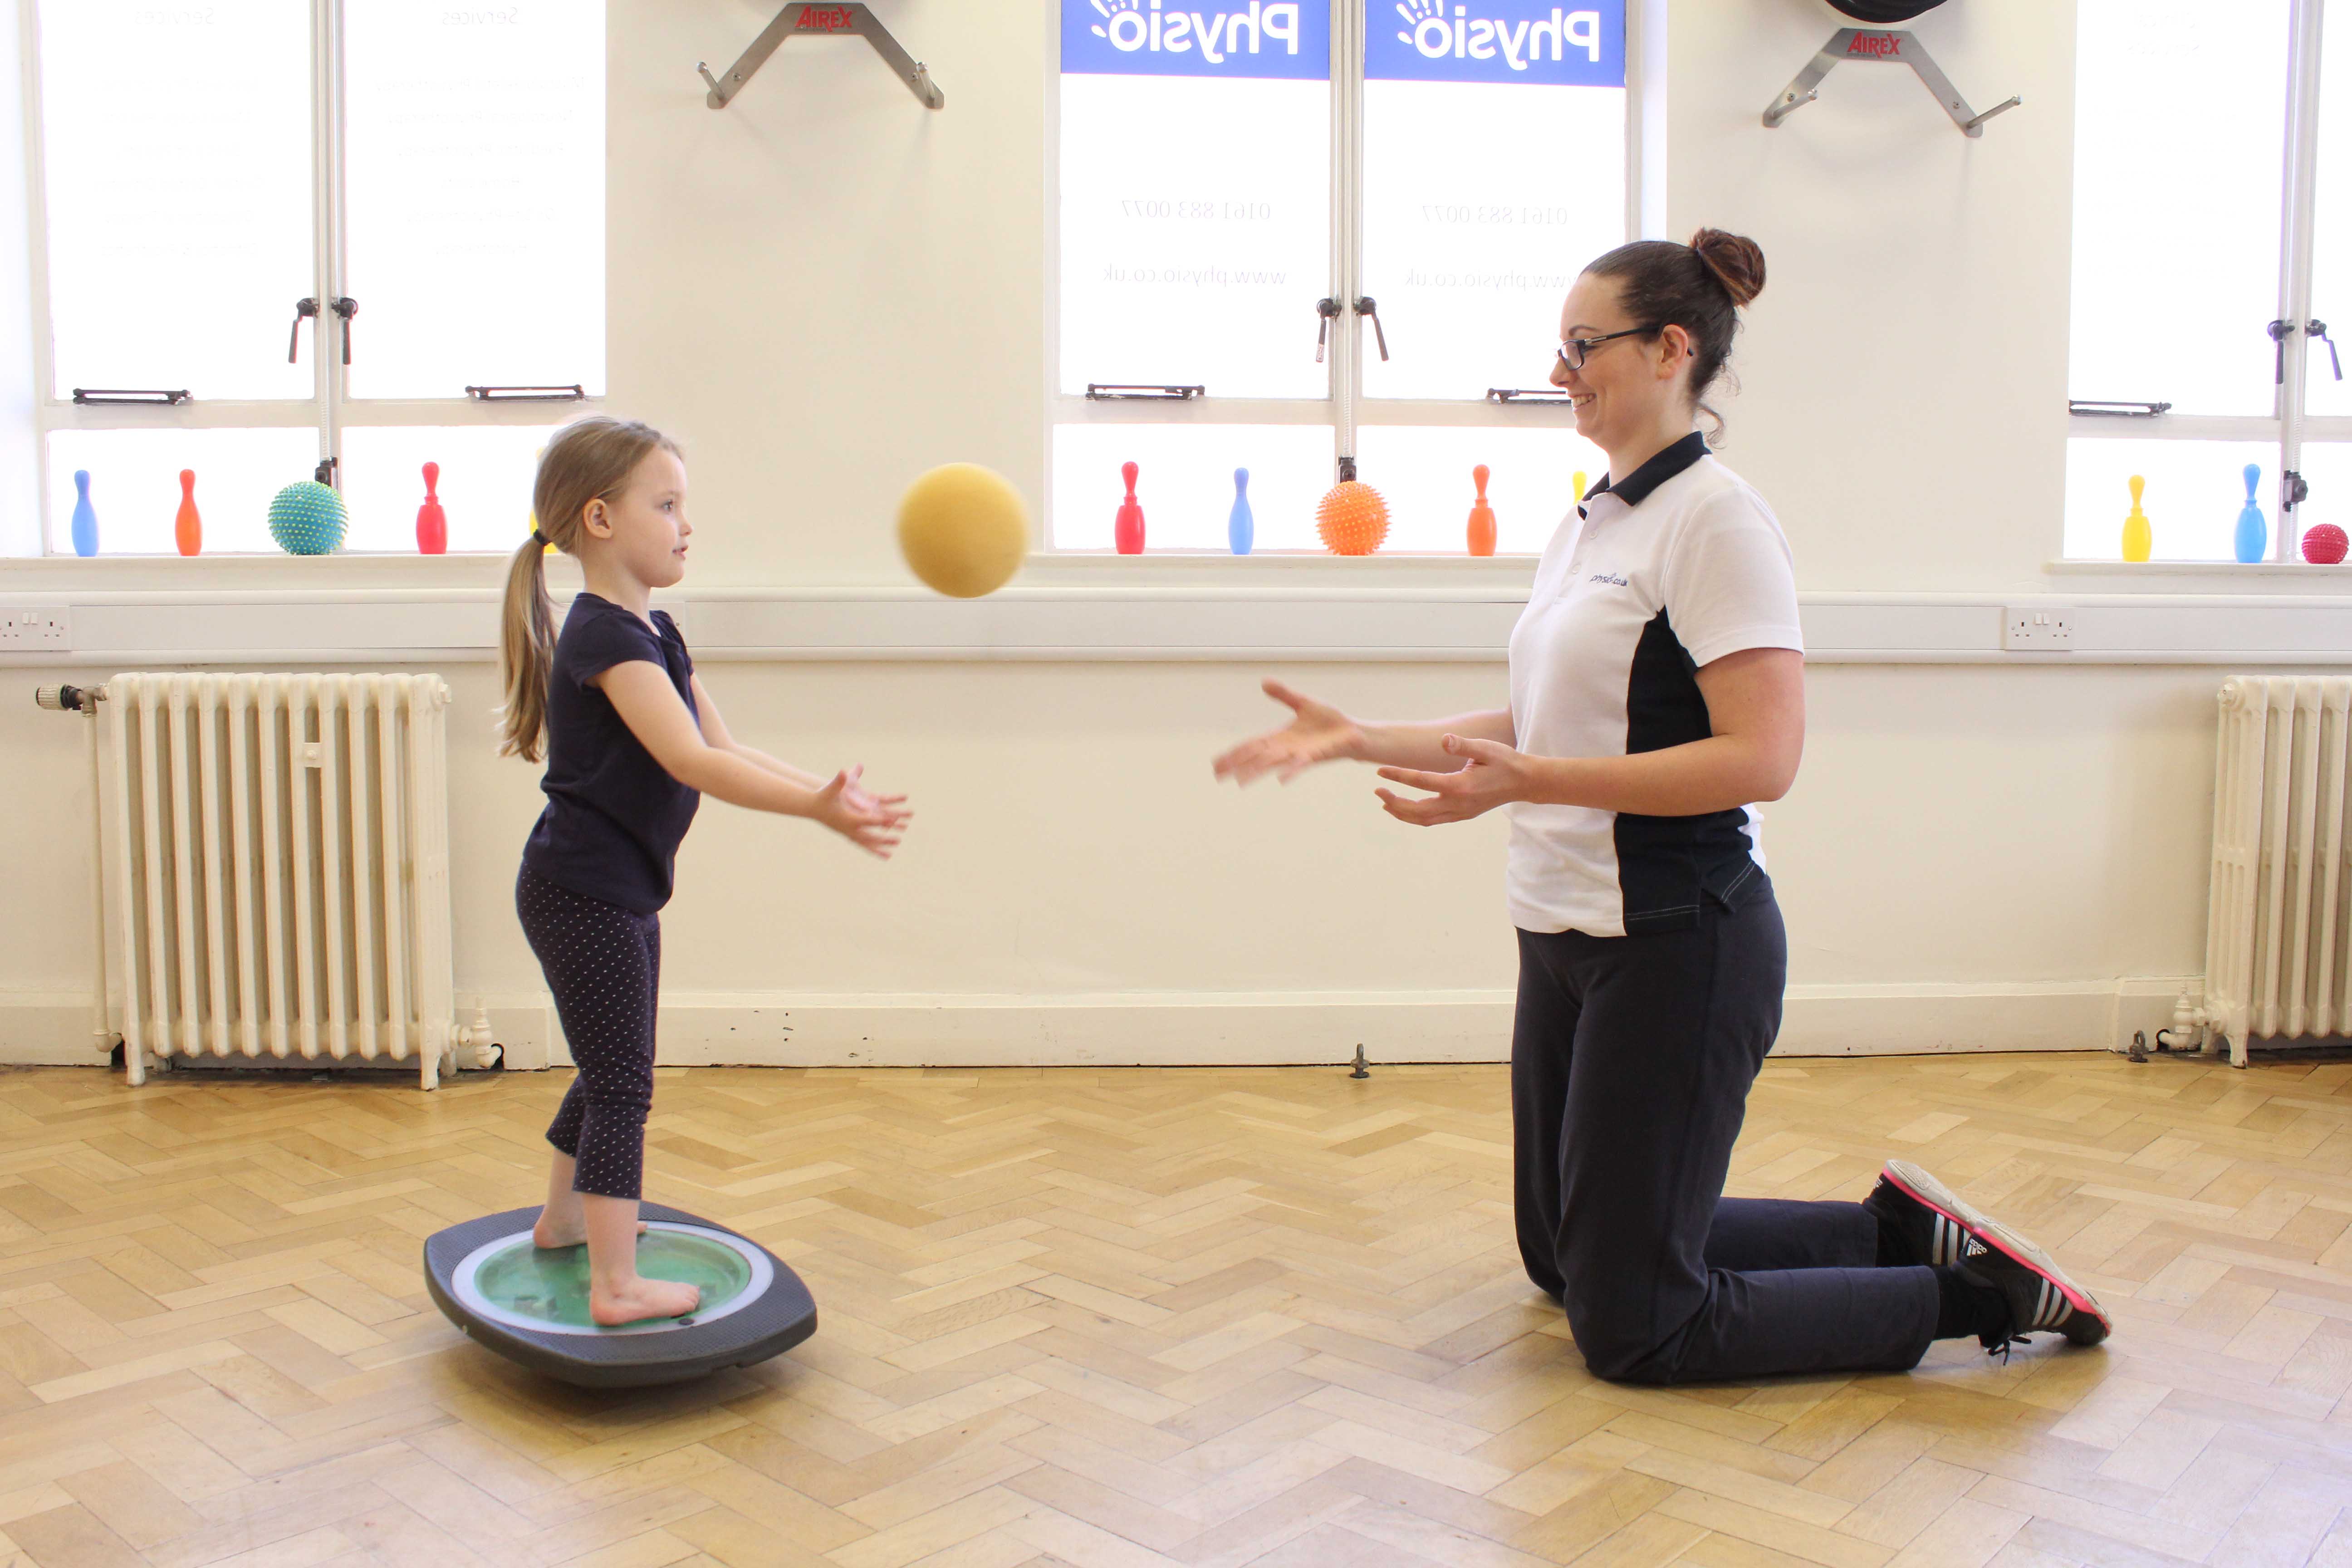 Balance training using a wobble board and ball with assistance from a paediatric neuro physiotherapist